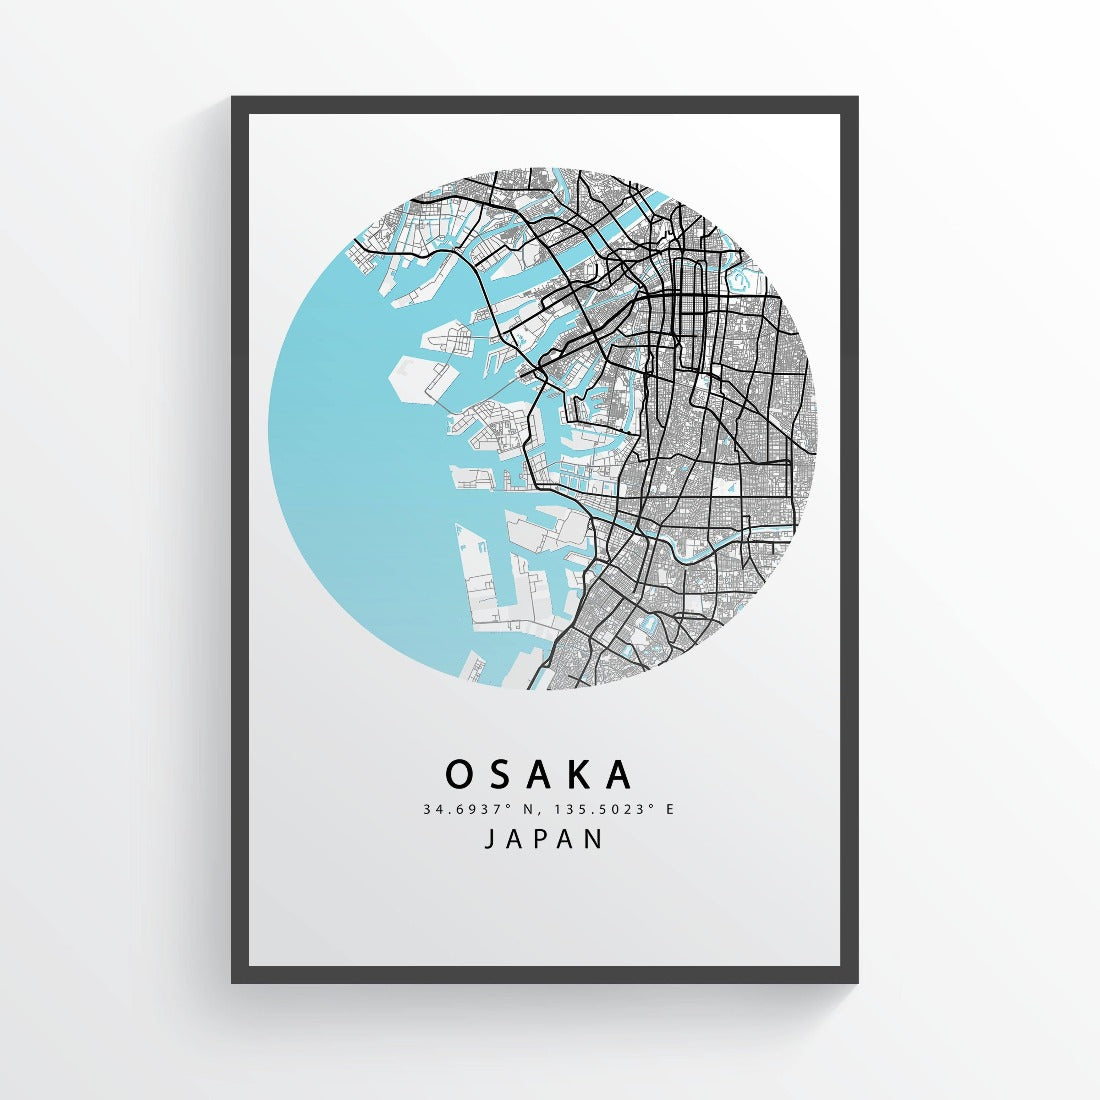 Experience Osaka like a local with this print of the city's street map.This print offers a unique perspective on Osaka, giving you a feel for the city's layout and streets.Measuring 18x24 inches, this print is perfect for framing and would make a great addition to any Japan-themed collection.